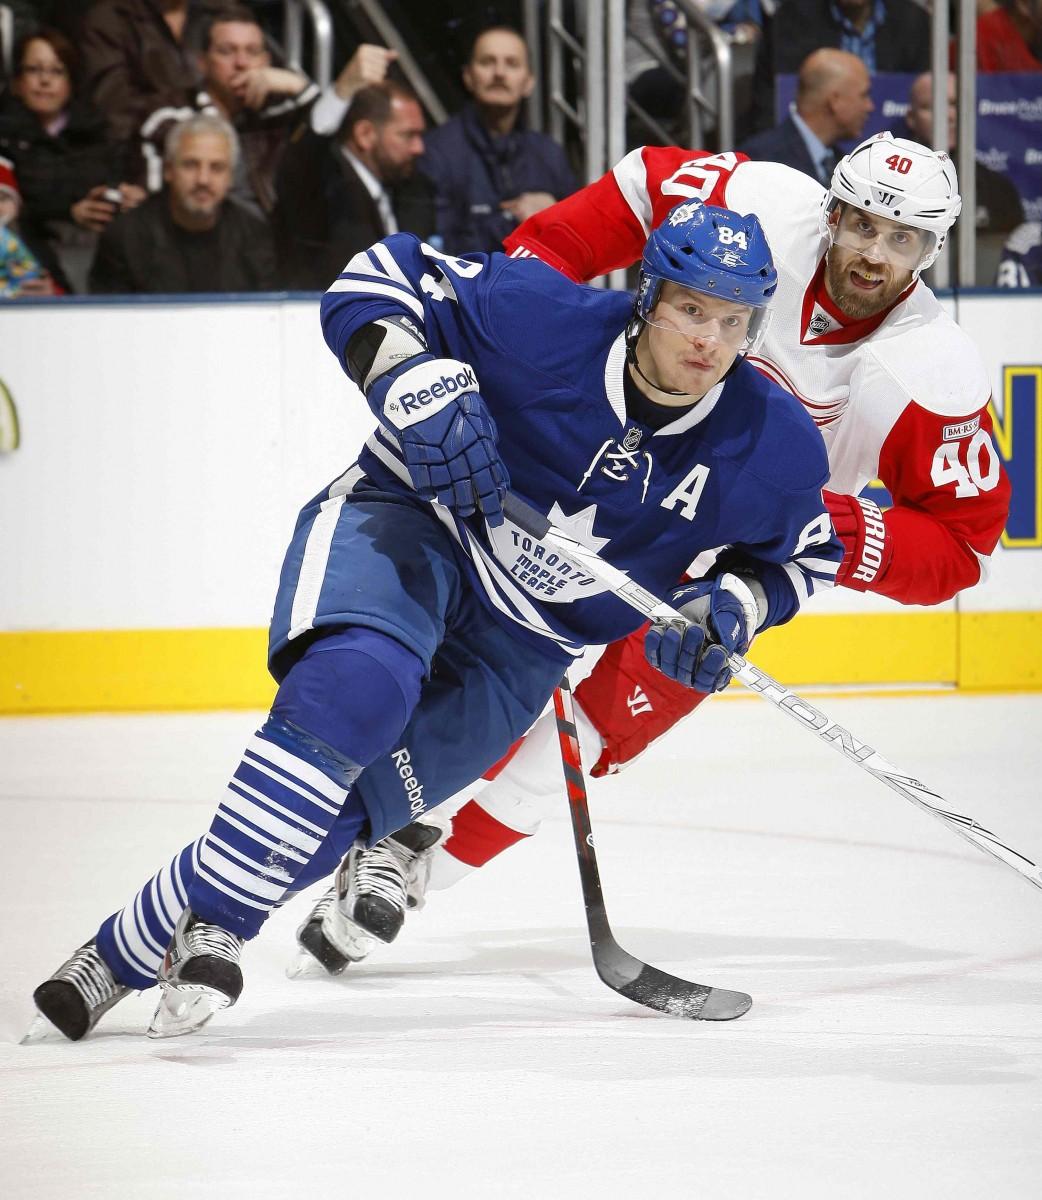 <a><img class="wp-image-1769089" src="https://www.theepochtimes.com/assets/uploads/2015/09/LeafsWings136619745.jpg" alt="Mikhail Grabovski of the Toronto Maple Leafs is pursued by Henrik Zetterberg of the Detroit Red Wings in a game at the Air Canada Centre on Jan. 7, 2012. The new NHL realignment has Detroit and Toronto in the same division once again. (Abelimages/Getty Images) " width="358" height="413"/></a>